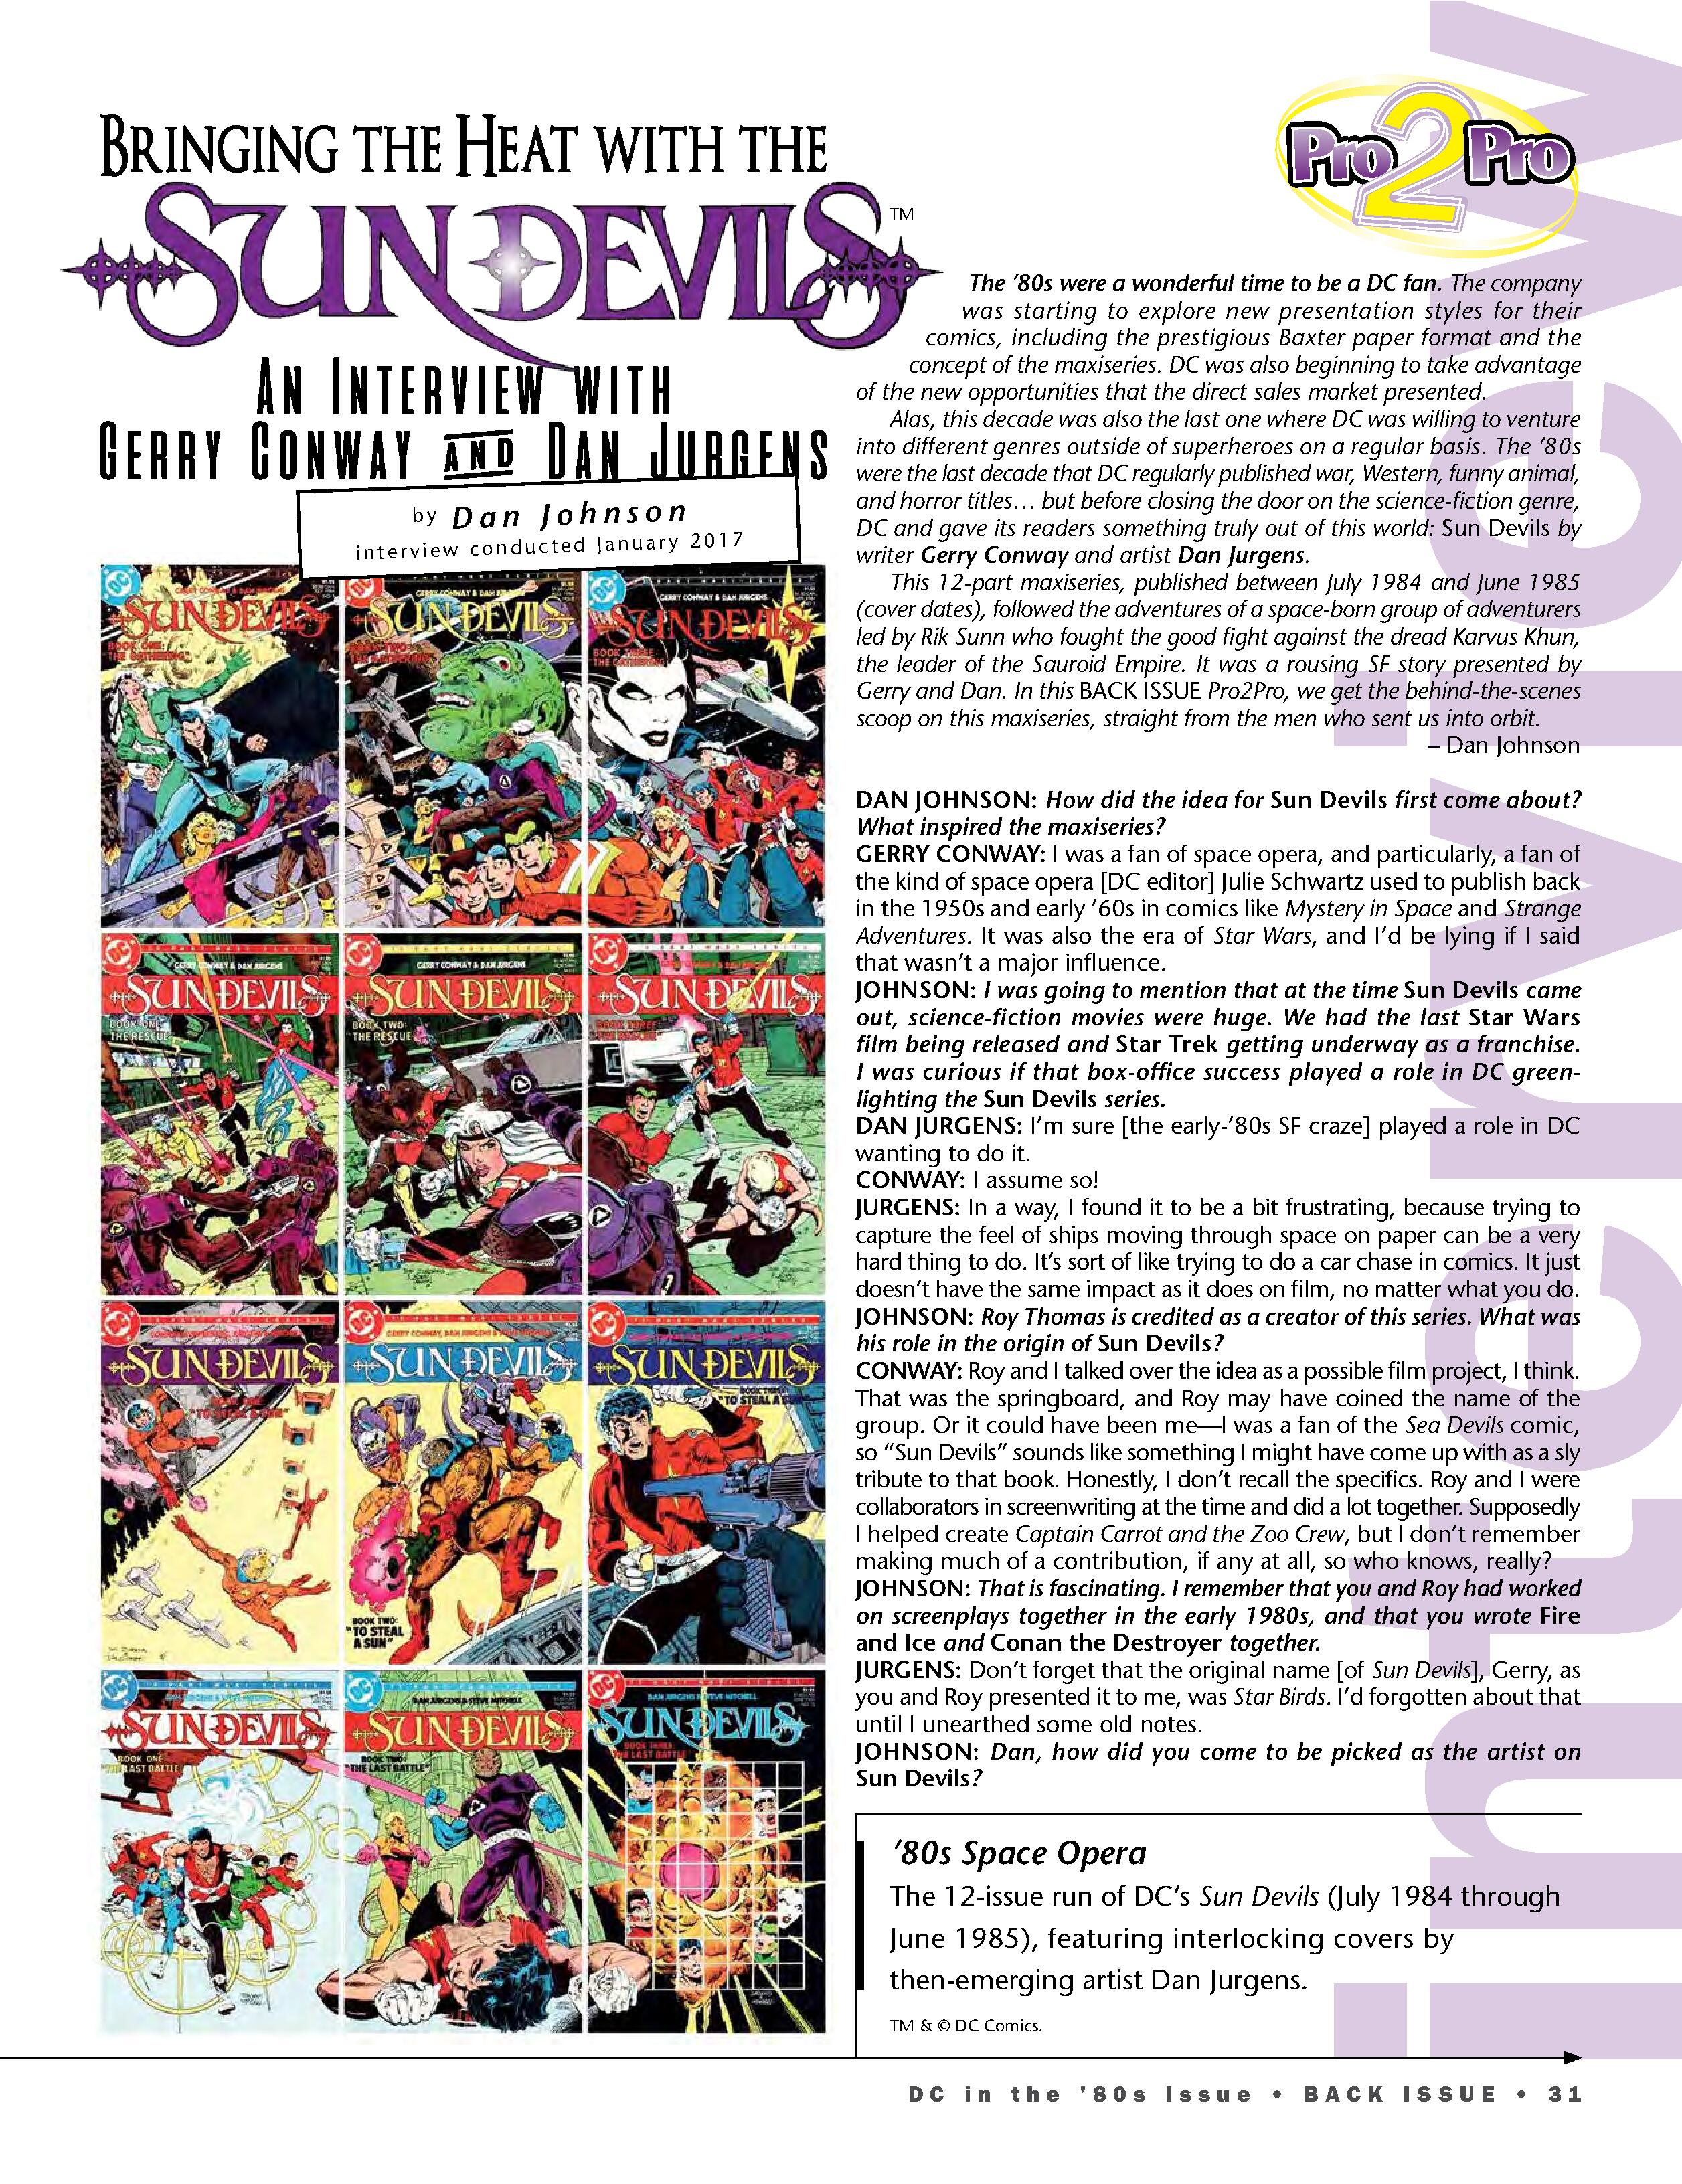 Read online Back Issue comic -  Issue #98 - 33